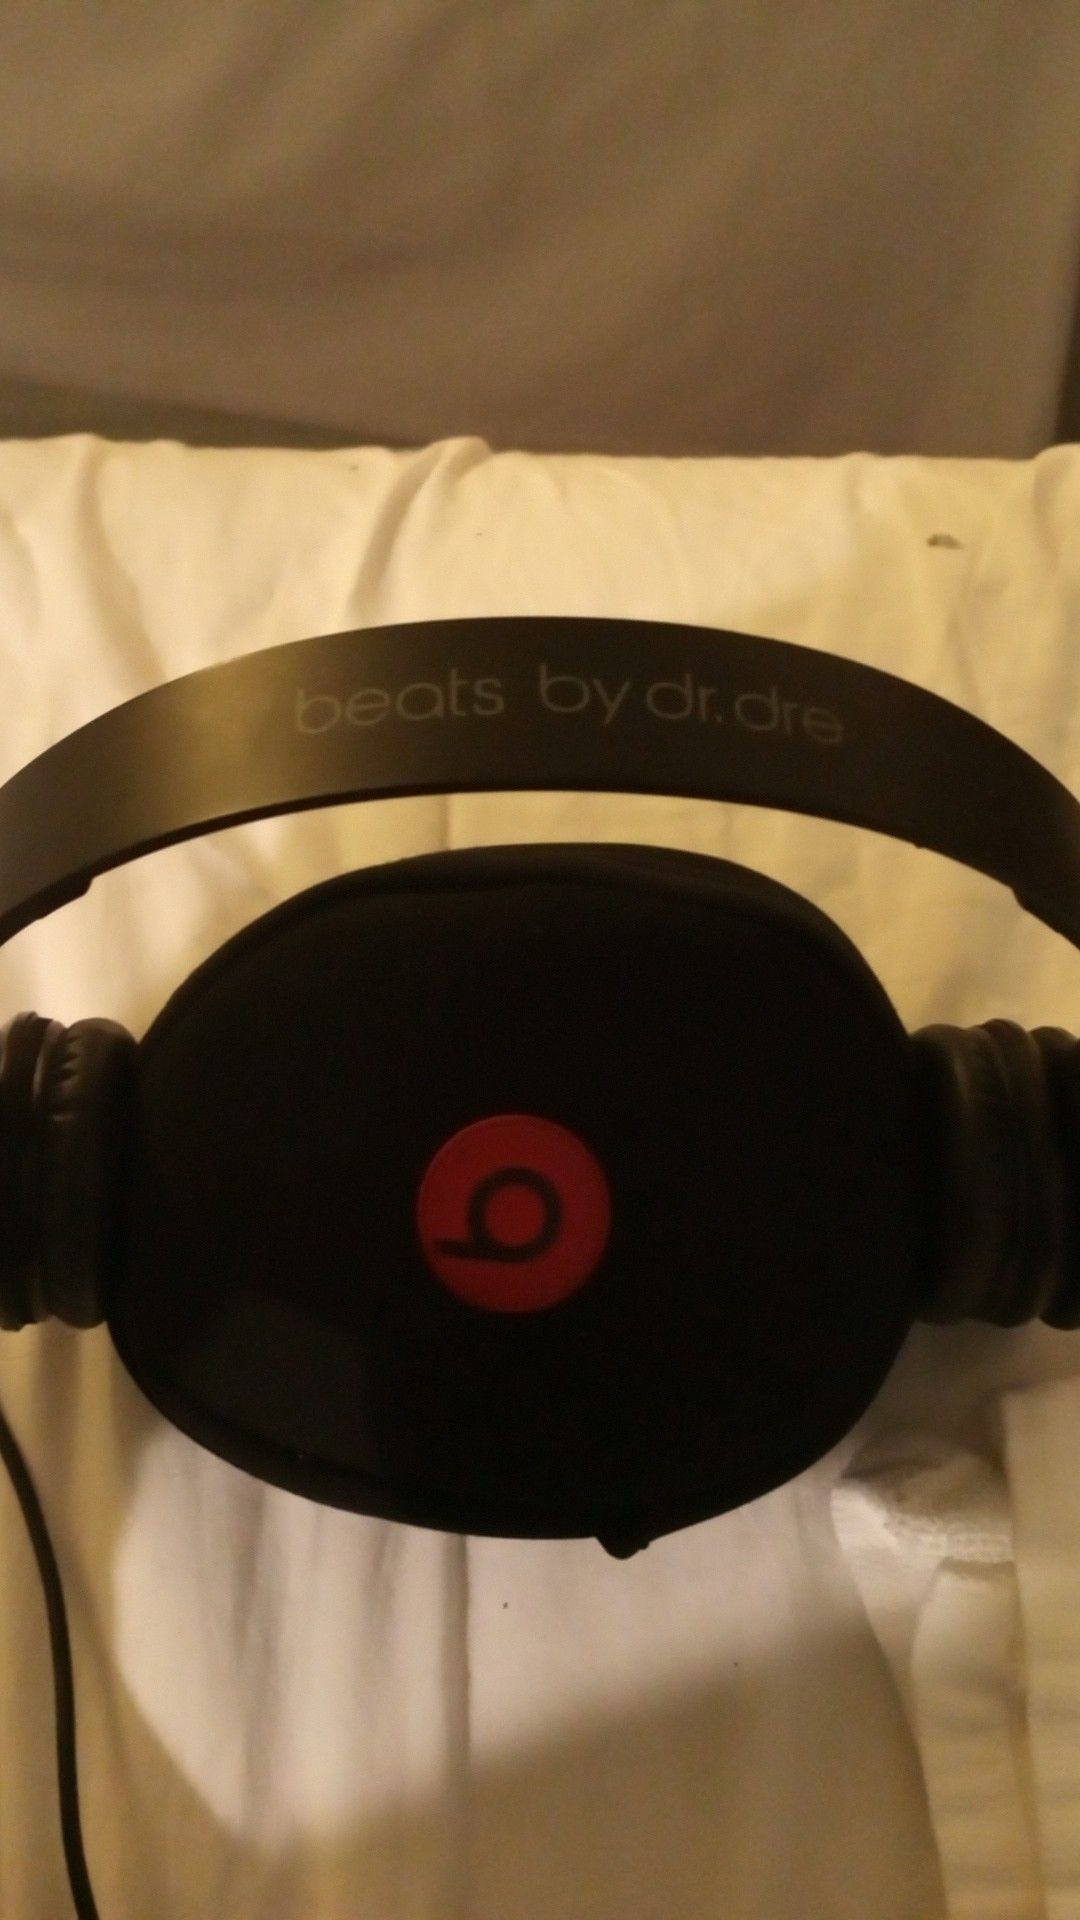 Over the ear headphones by beats by Dre